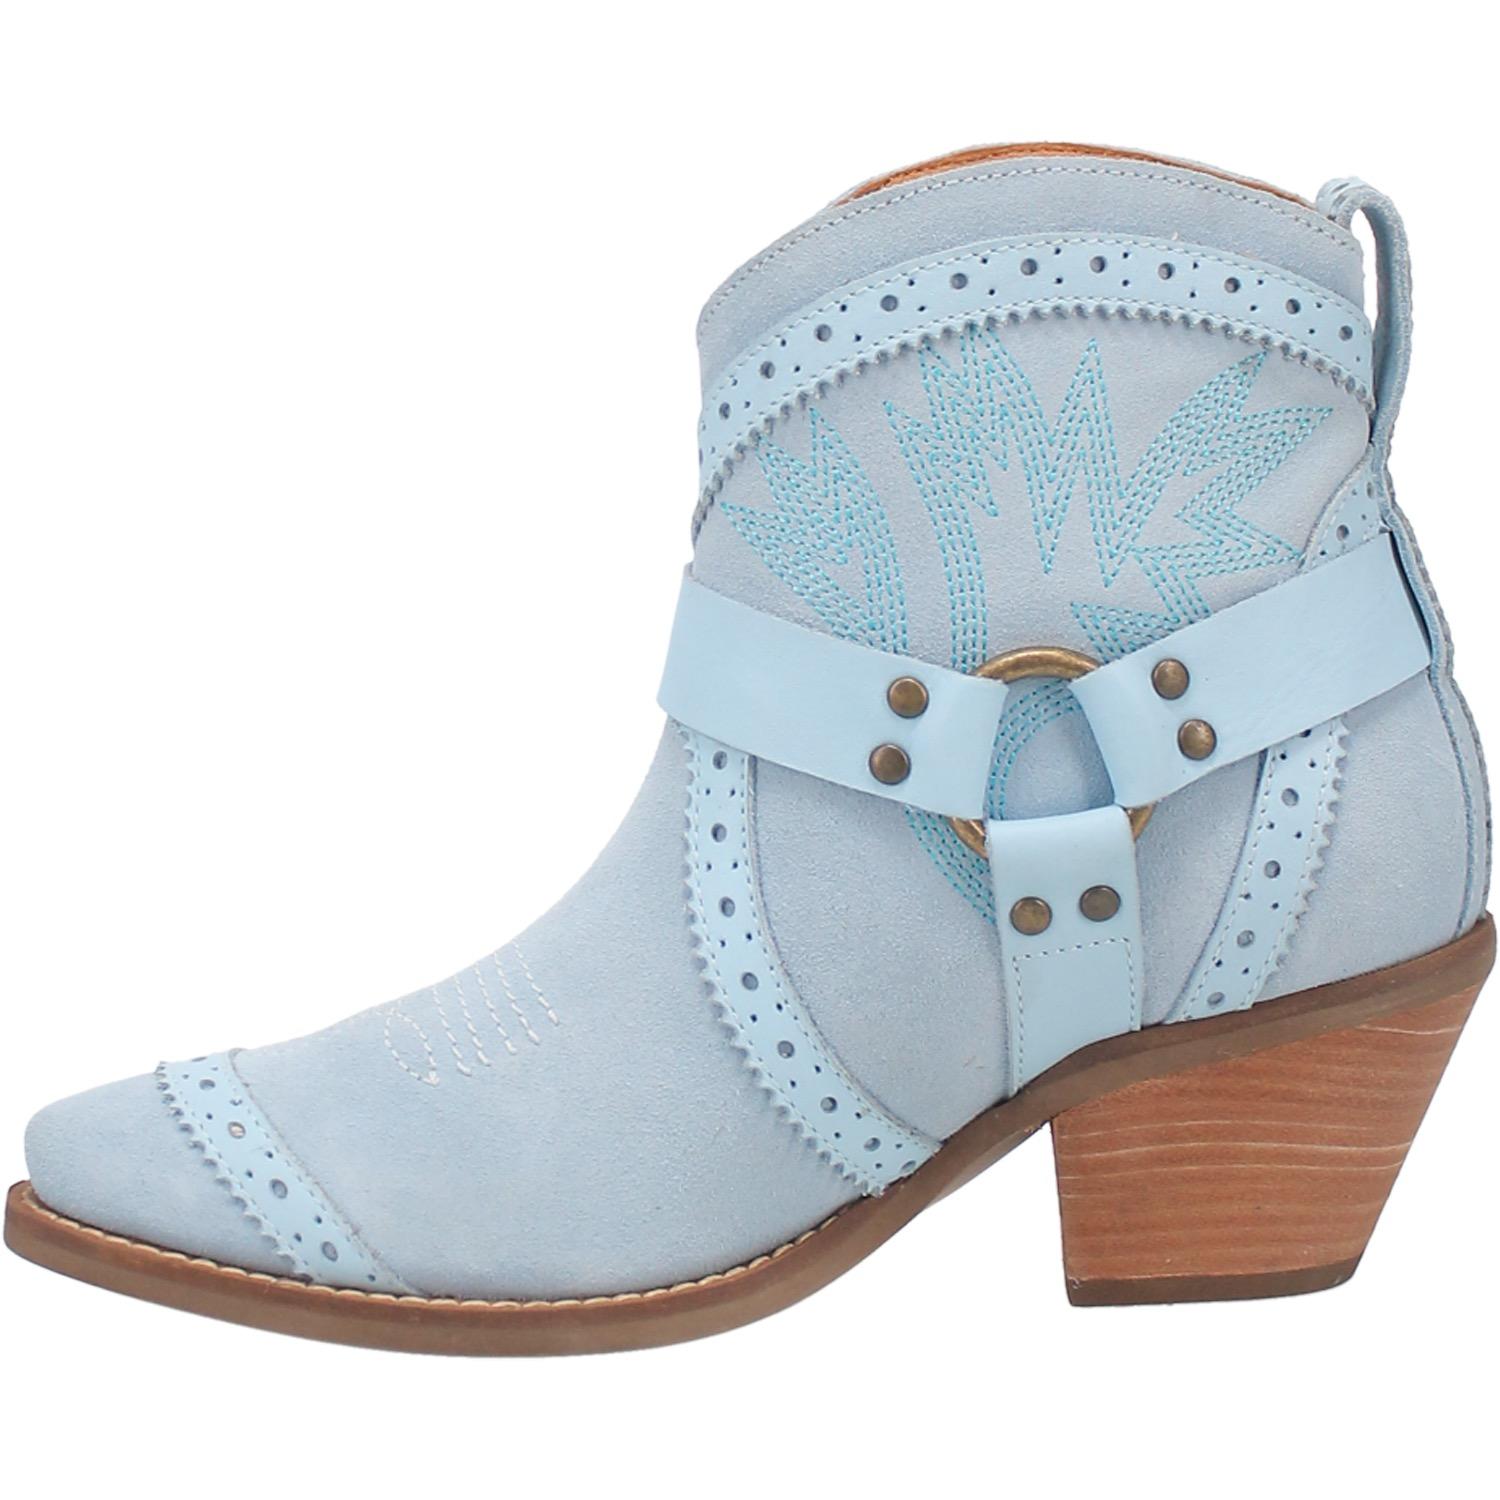 Gummy Bear Blue Suede Leather Booties w/ Embroidered Designs (DS)